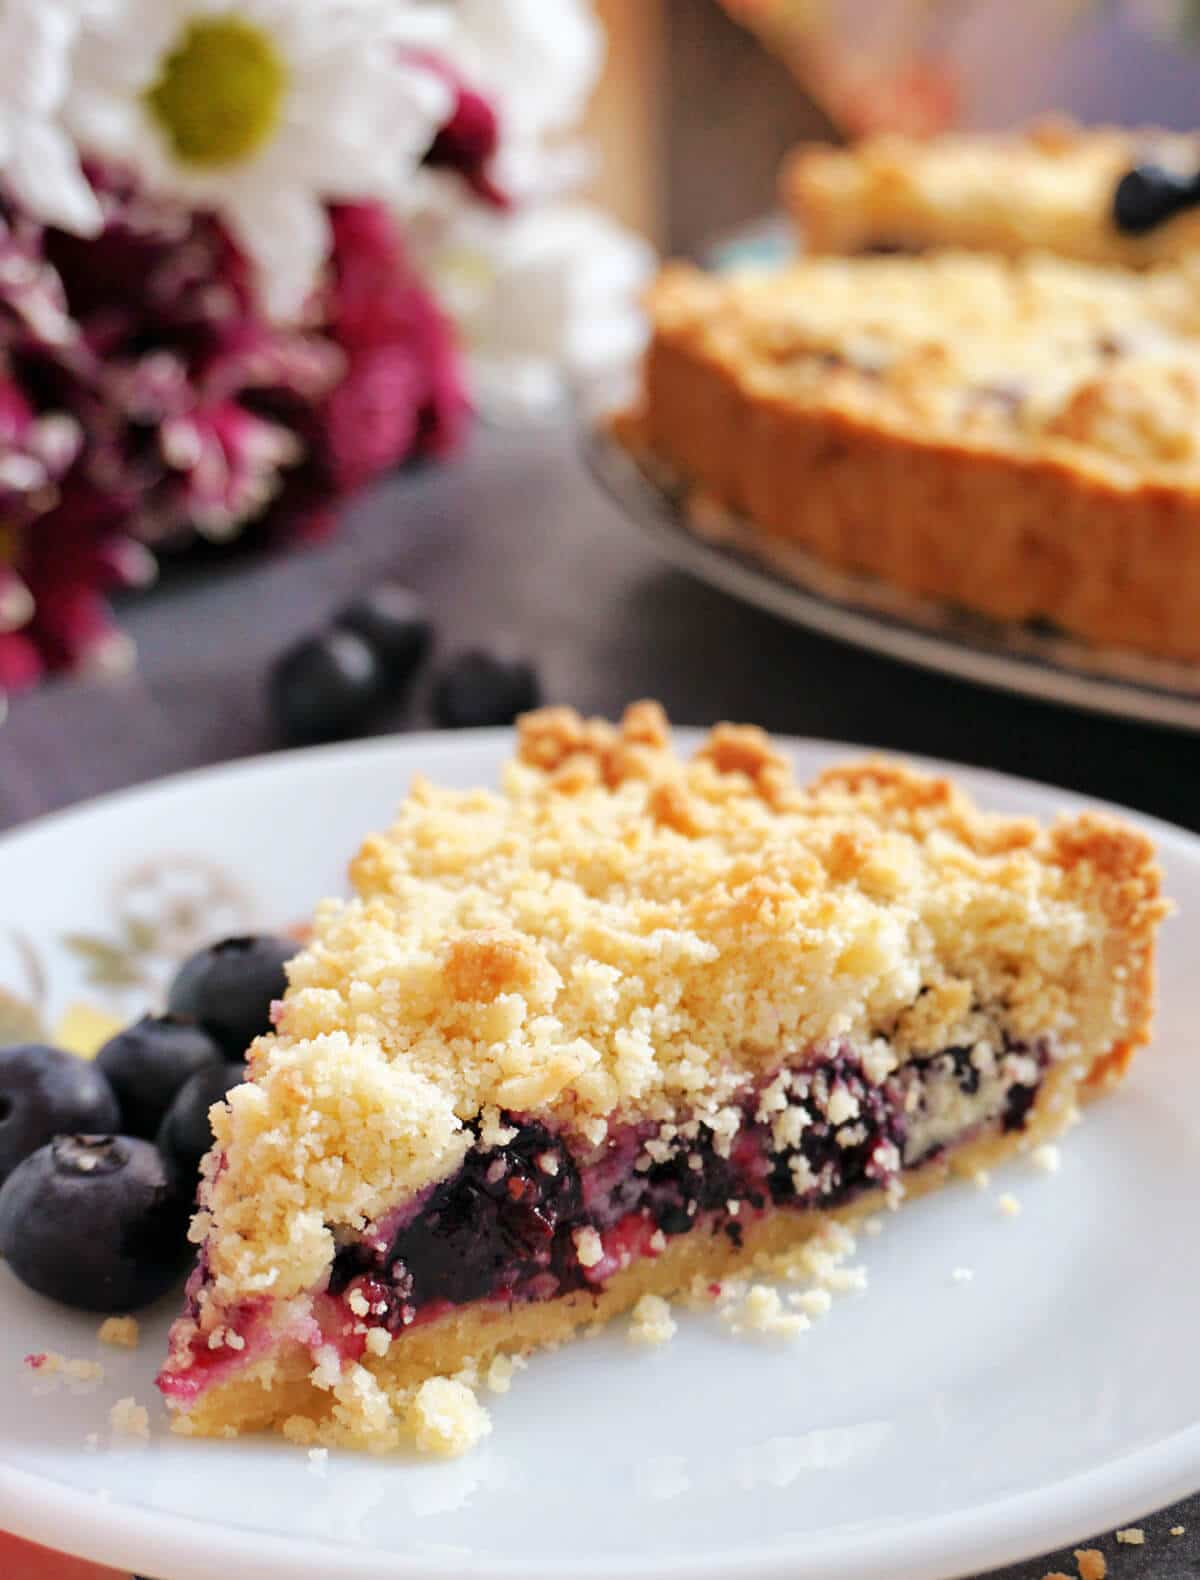 A slice of blueberry pie on a white plate with blueberries around.